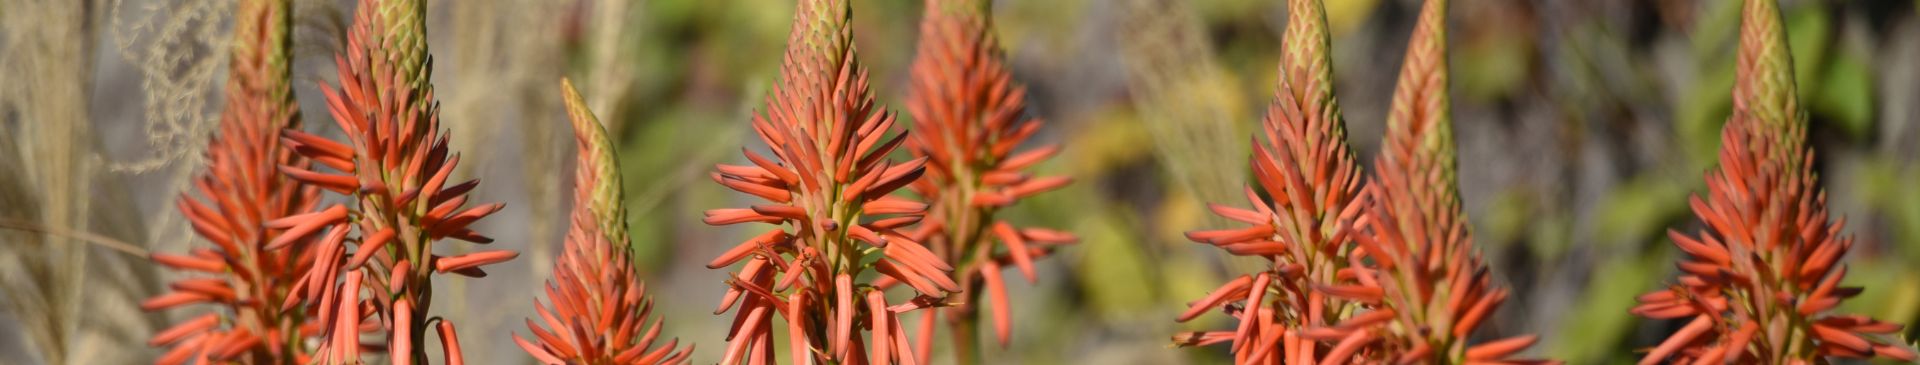 Growing Ornamental Aloes for Year-Round Colour and Interest